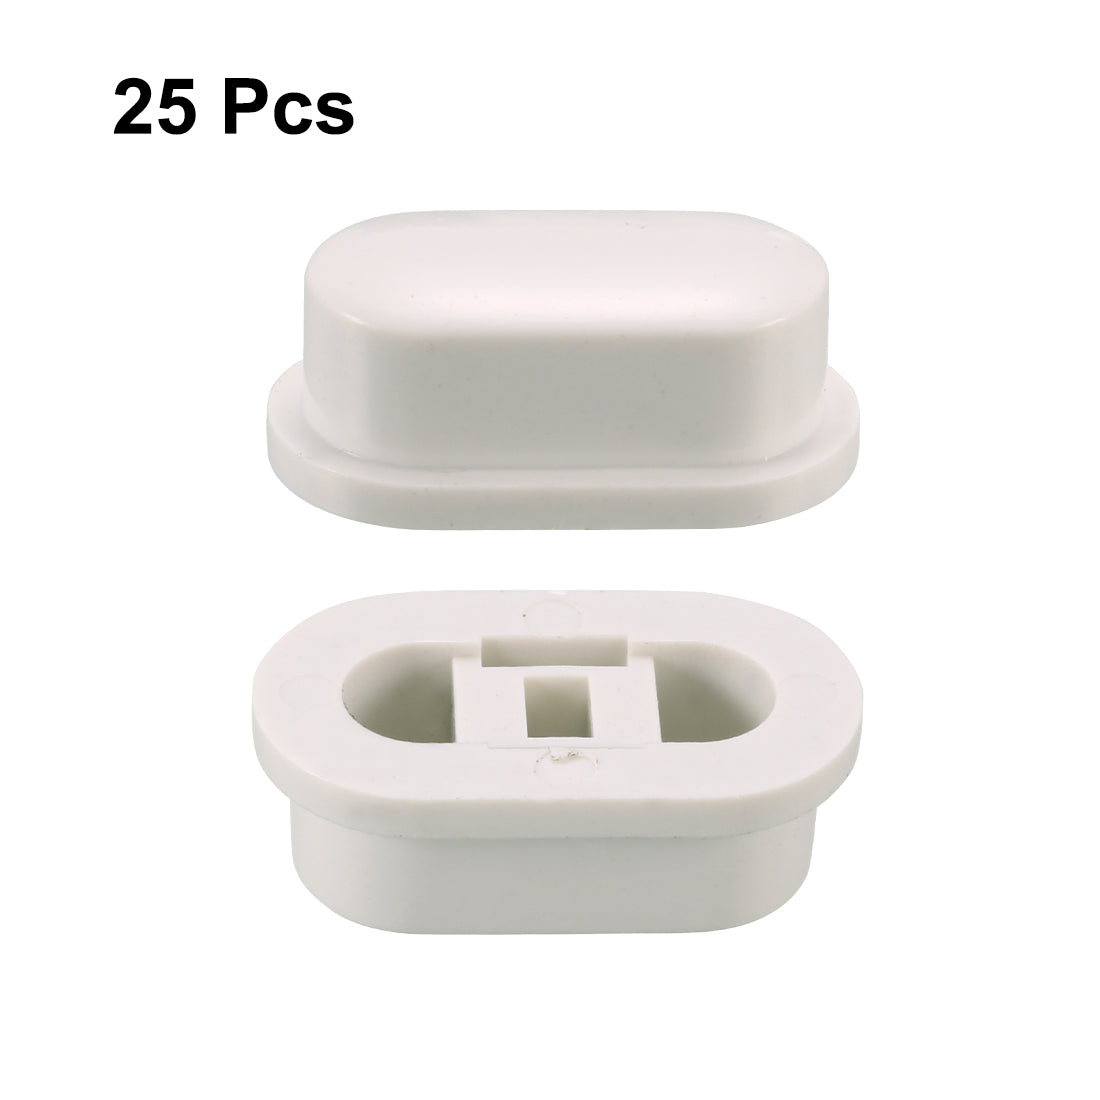 uxcell Uxcell 25Pcs Plastic 18x10x7mm Latching Pushbutton Tactile Switch Caps Cover Keycaps Protector White